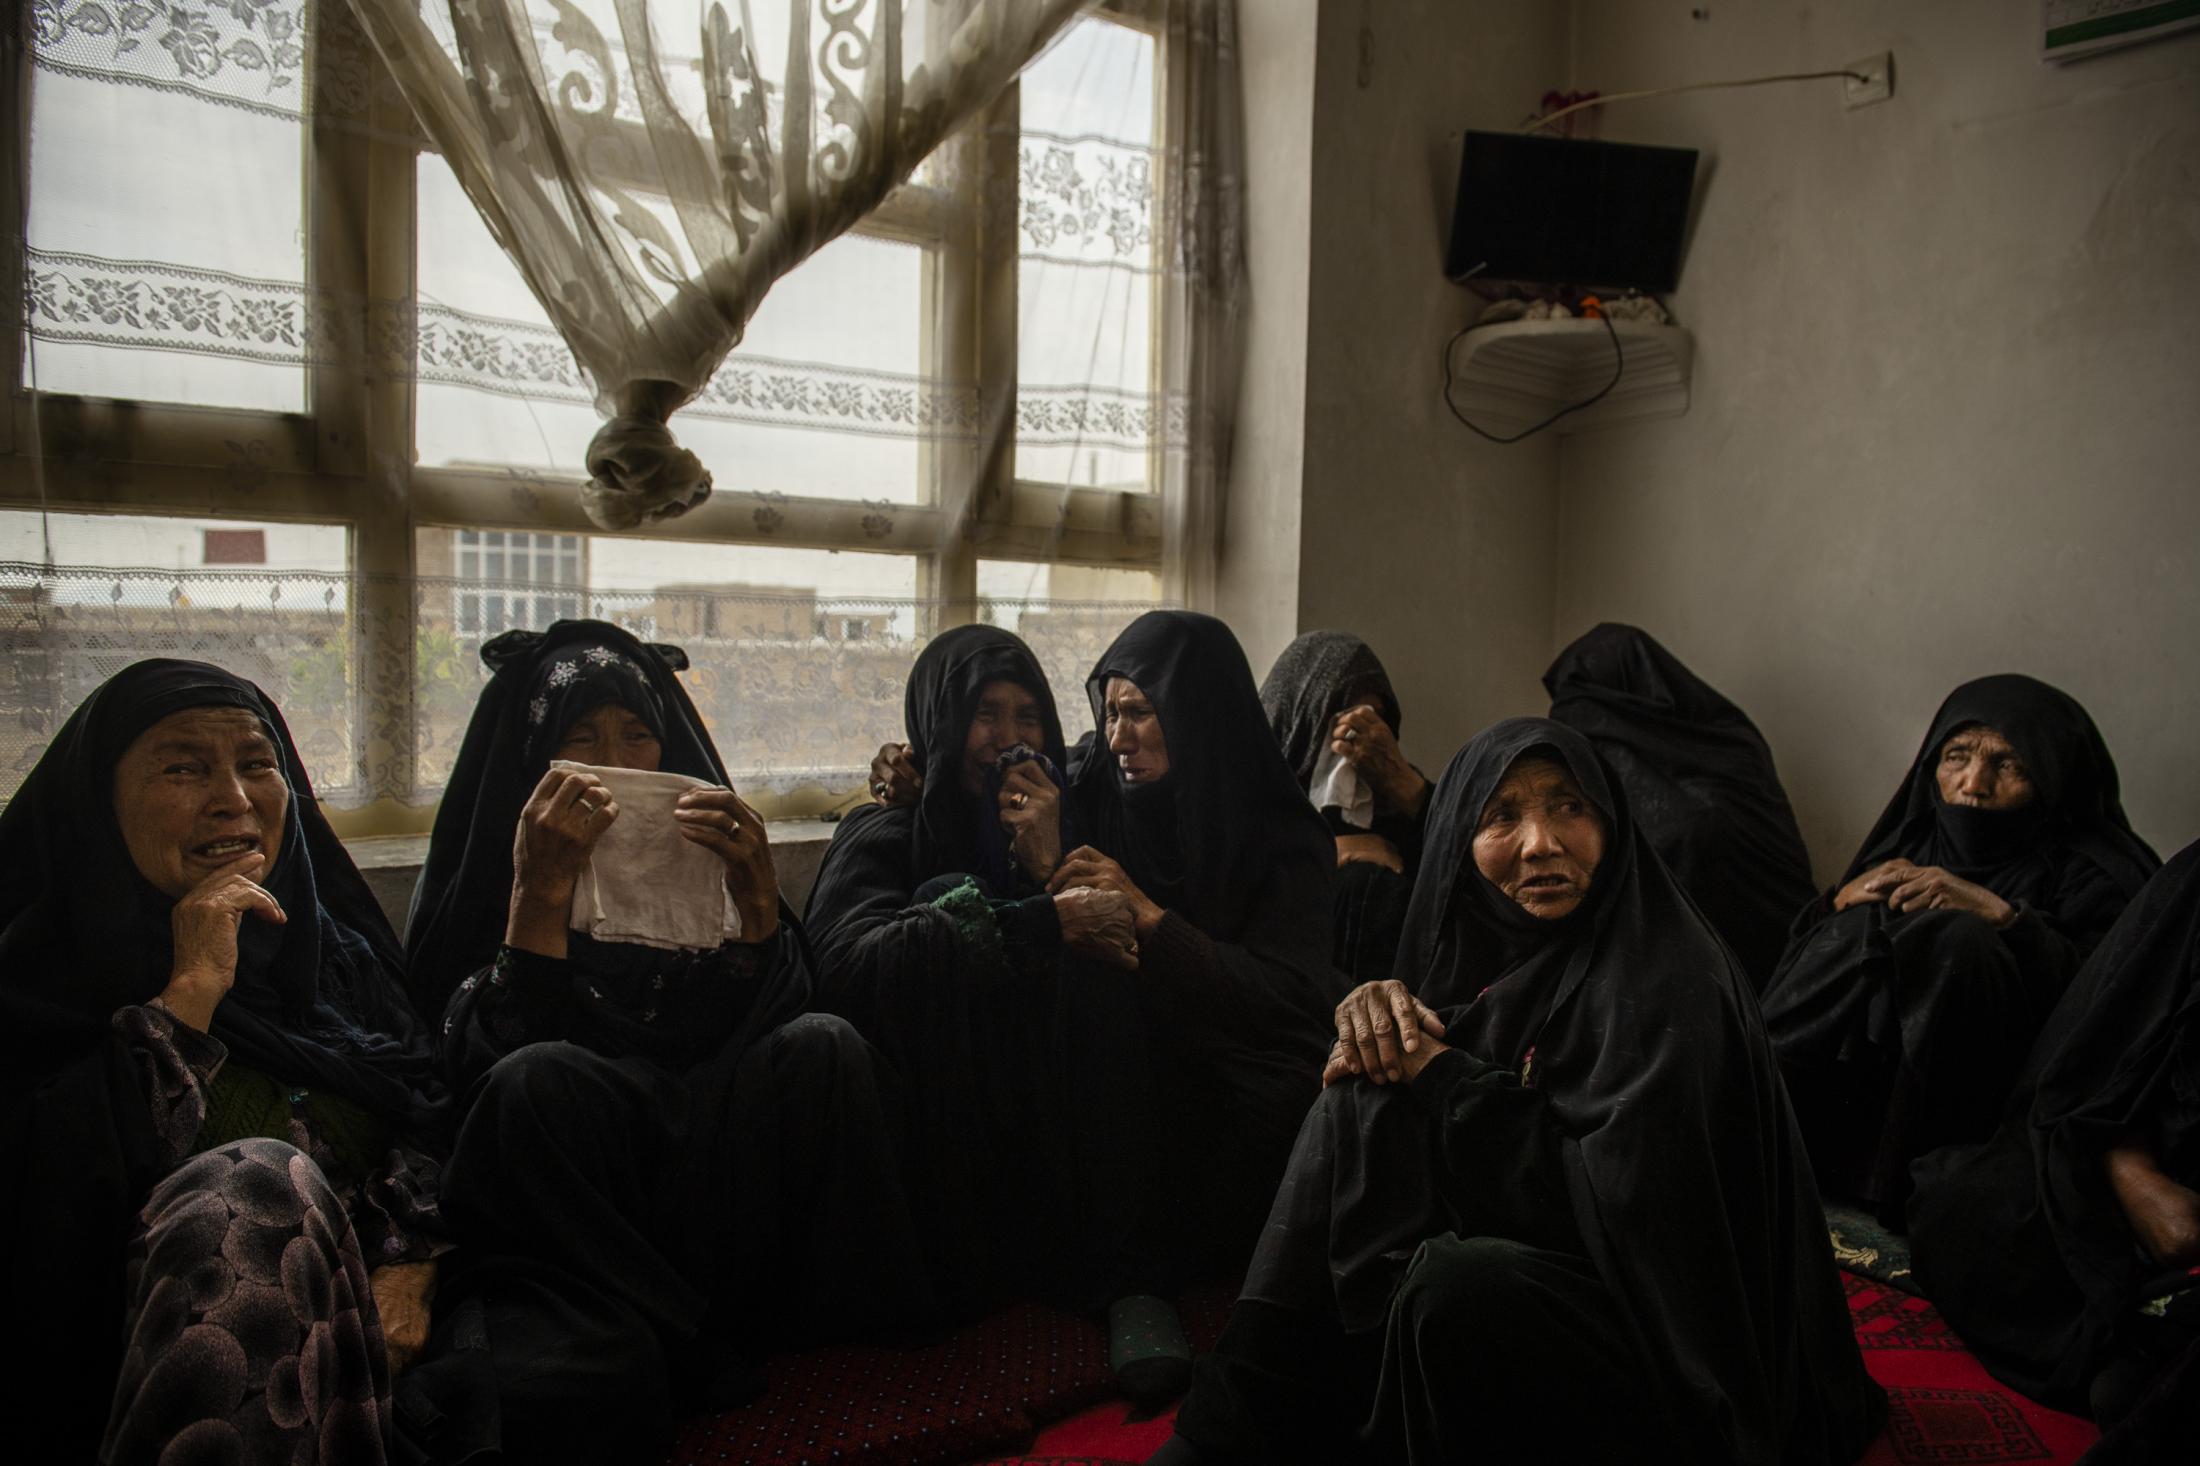 KABUL | KABUL | AFGHANISTAN | 5/13/20 | Hajar's mom is consoled and held by a family member. After Hajar and her unborn baby's burial, the women gathered inside one room to console her mother, mother-in-law and her sister and pay their respect to the family.